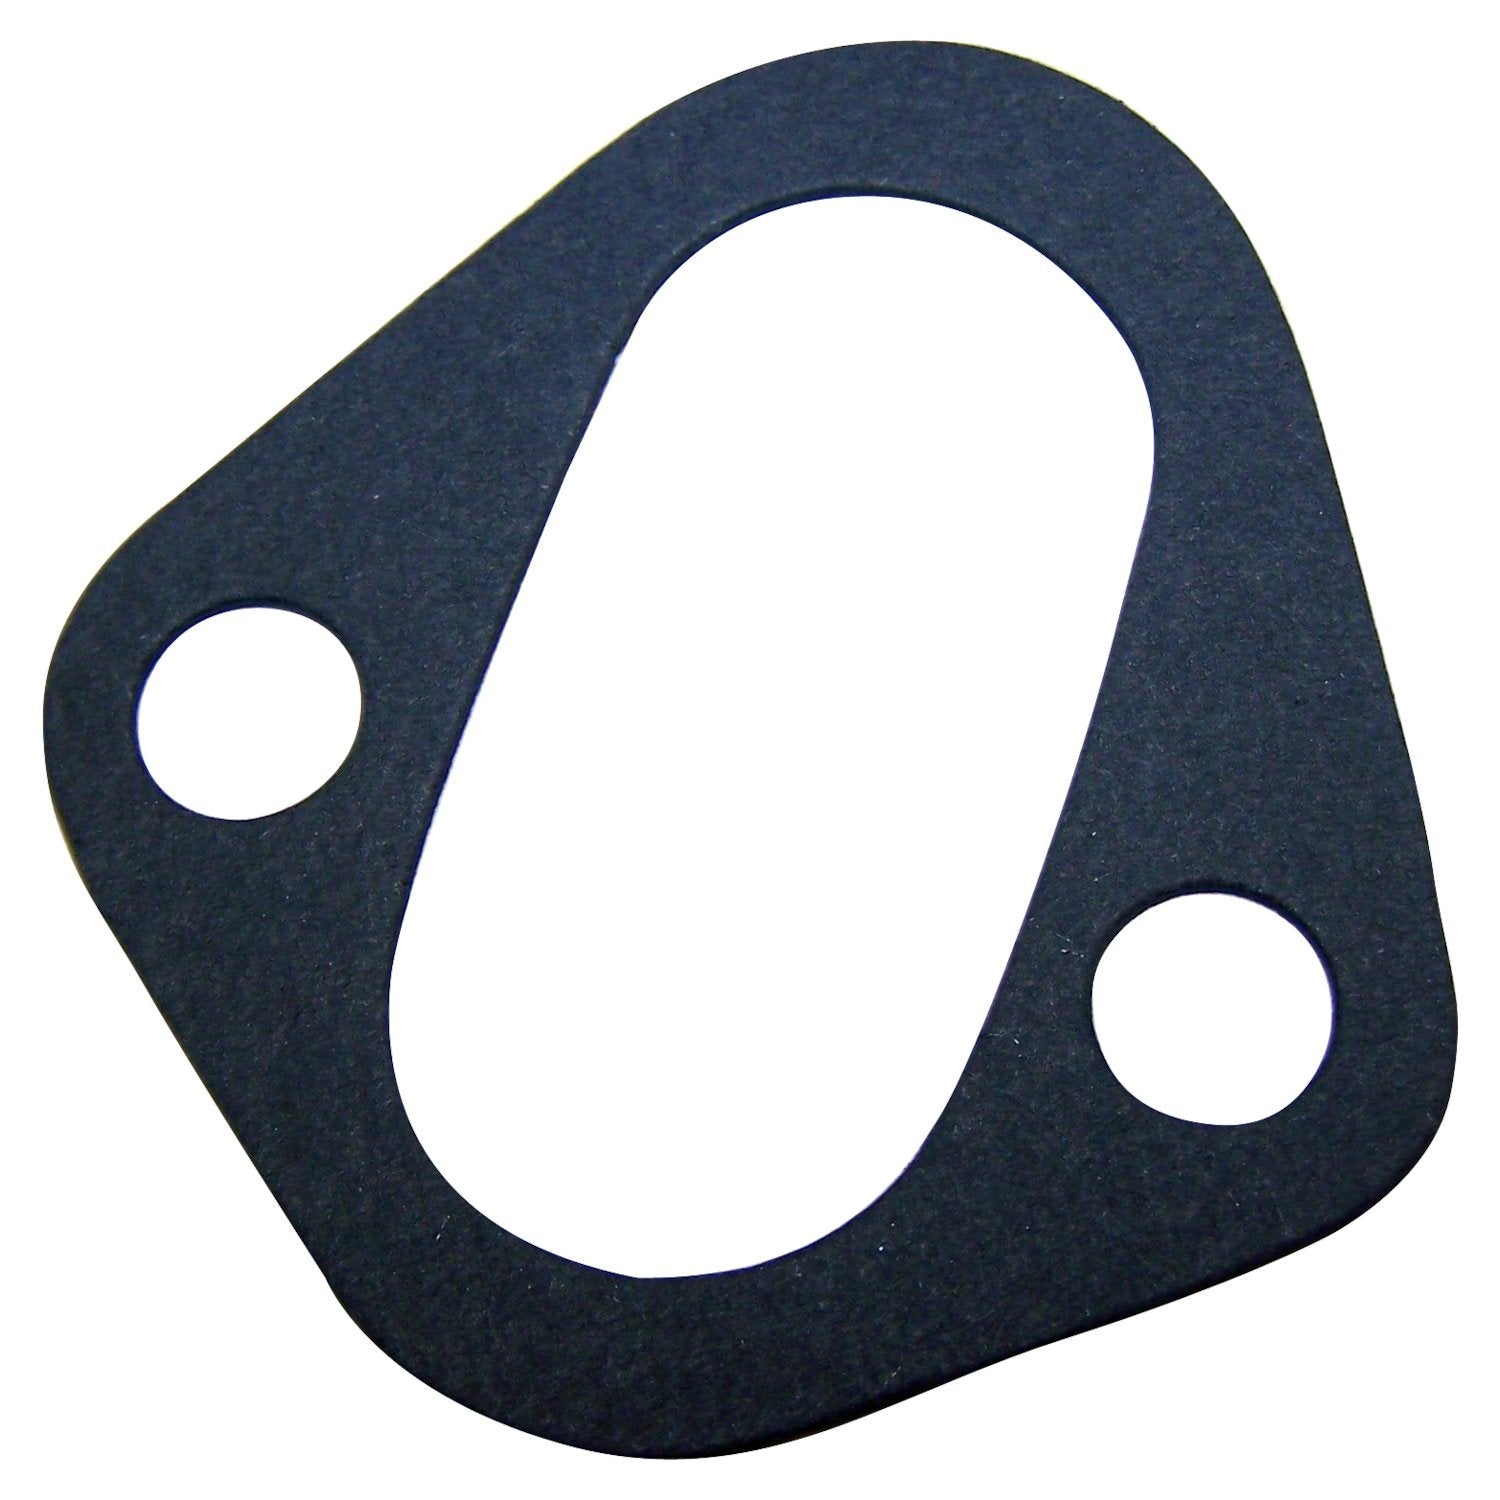 Fuel Pump Gasket for 1971-1991 Misc. Jeep Vehicles